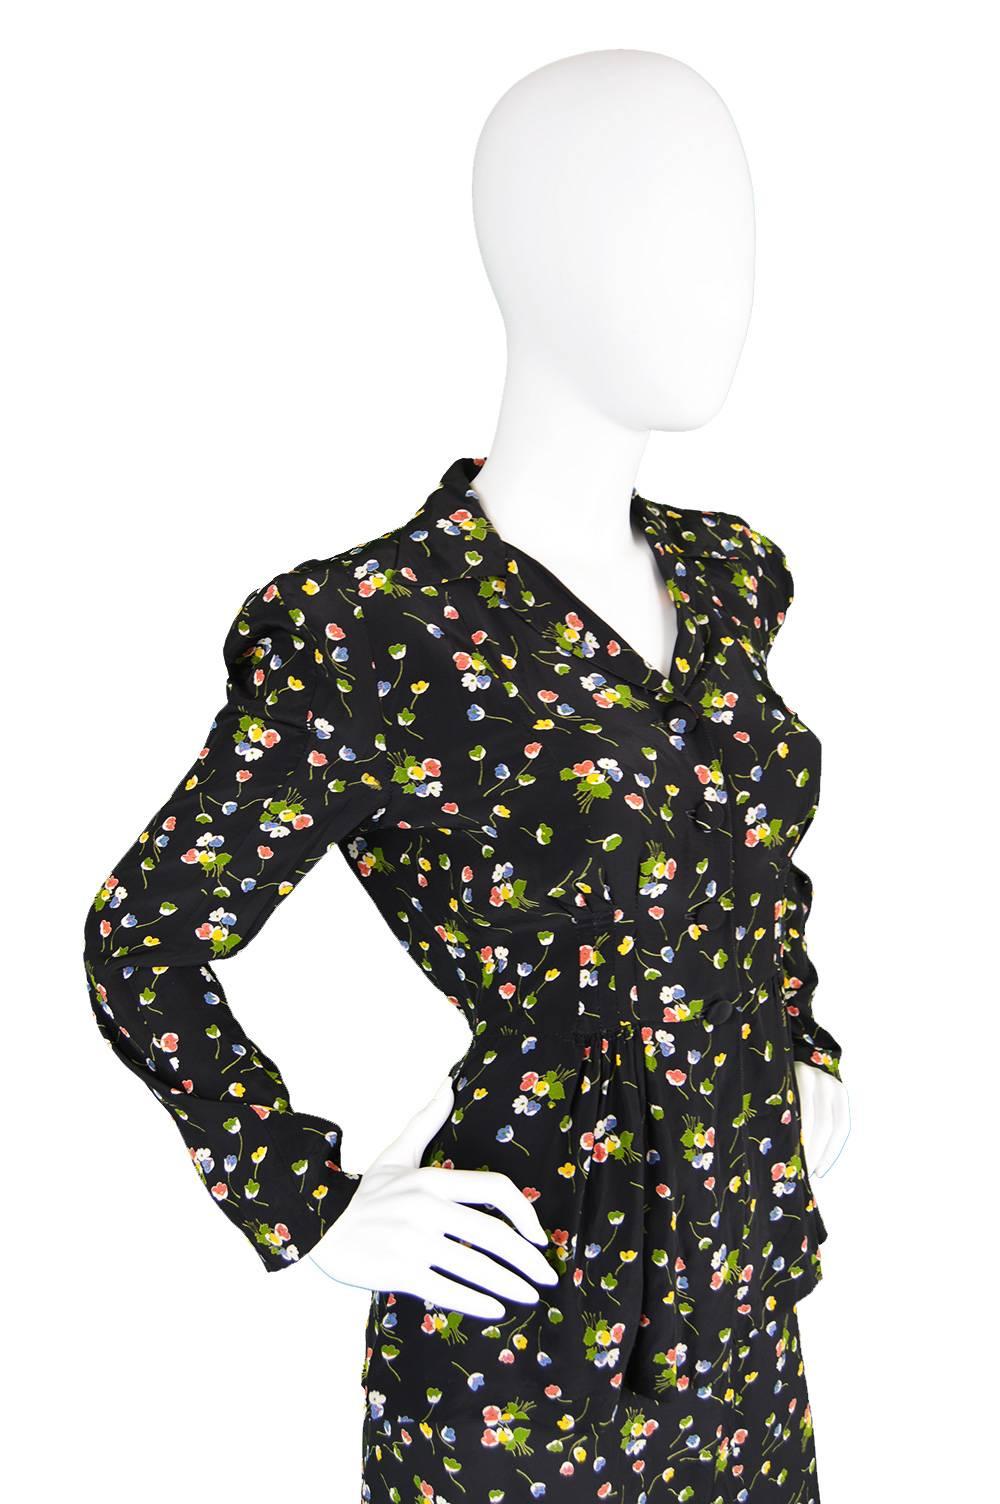 An incredible vintage women's two piece skirt suit from the 1970s by genius and highly collectible vintage British boutique designer, Jeff Banks. In a black, silky rayon fabric with a ditsy floral print and a 1940s inspired silhouette. The blouse